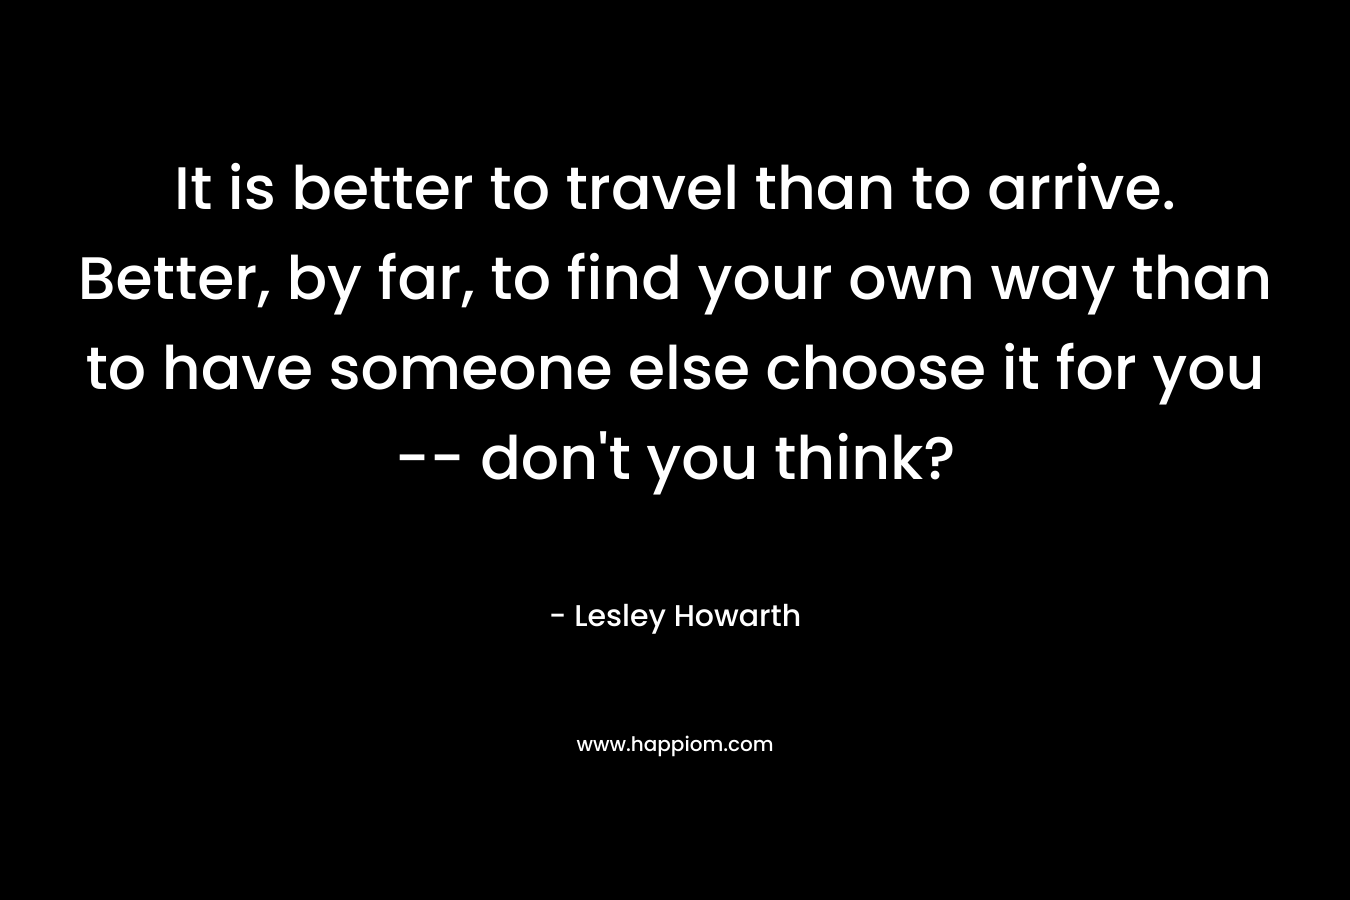 It is better to travel than to arrive. Better, by far, to find your own way than to have someone else choose it for you -- don't you think?